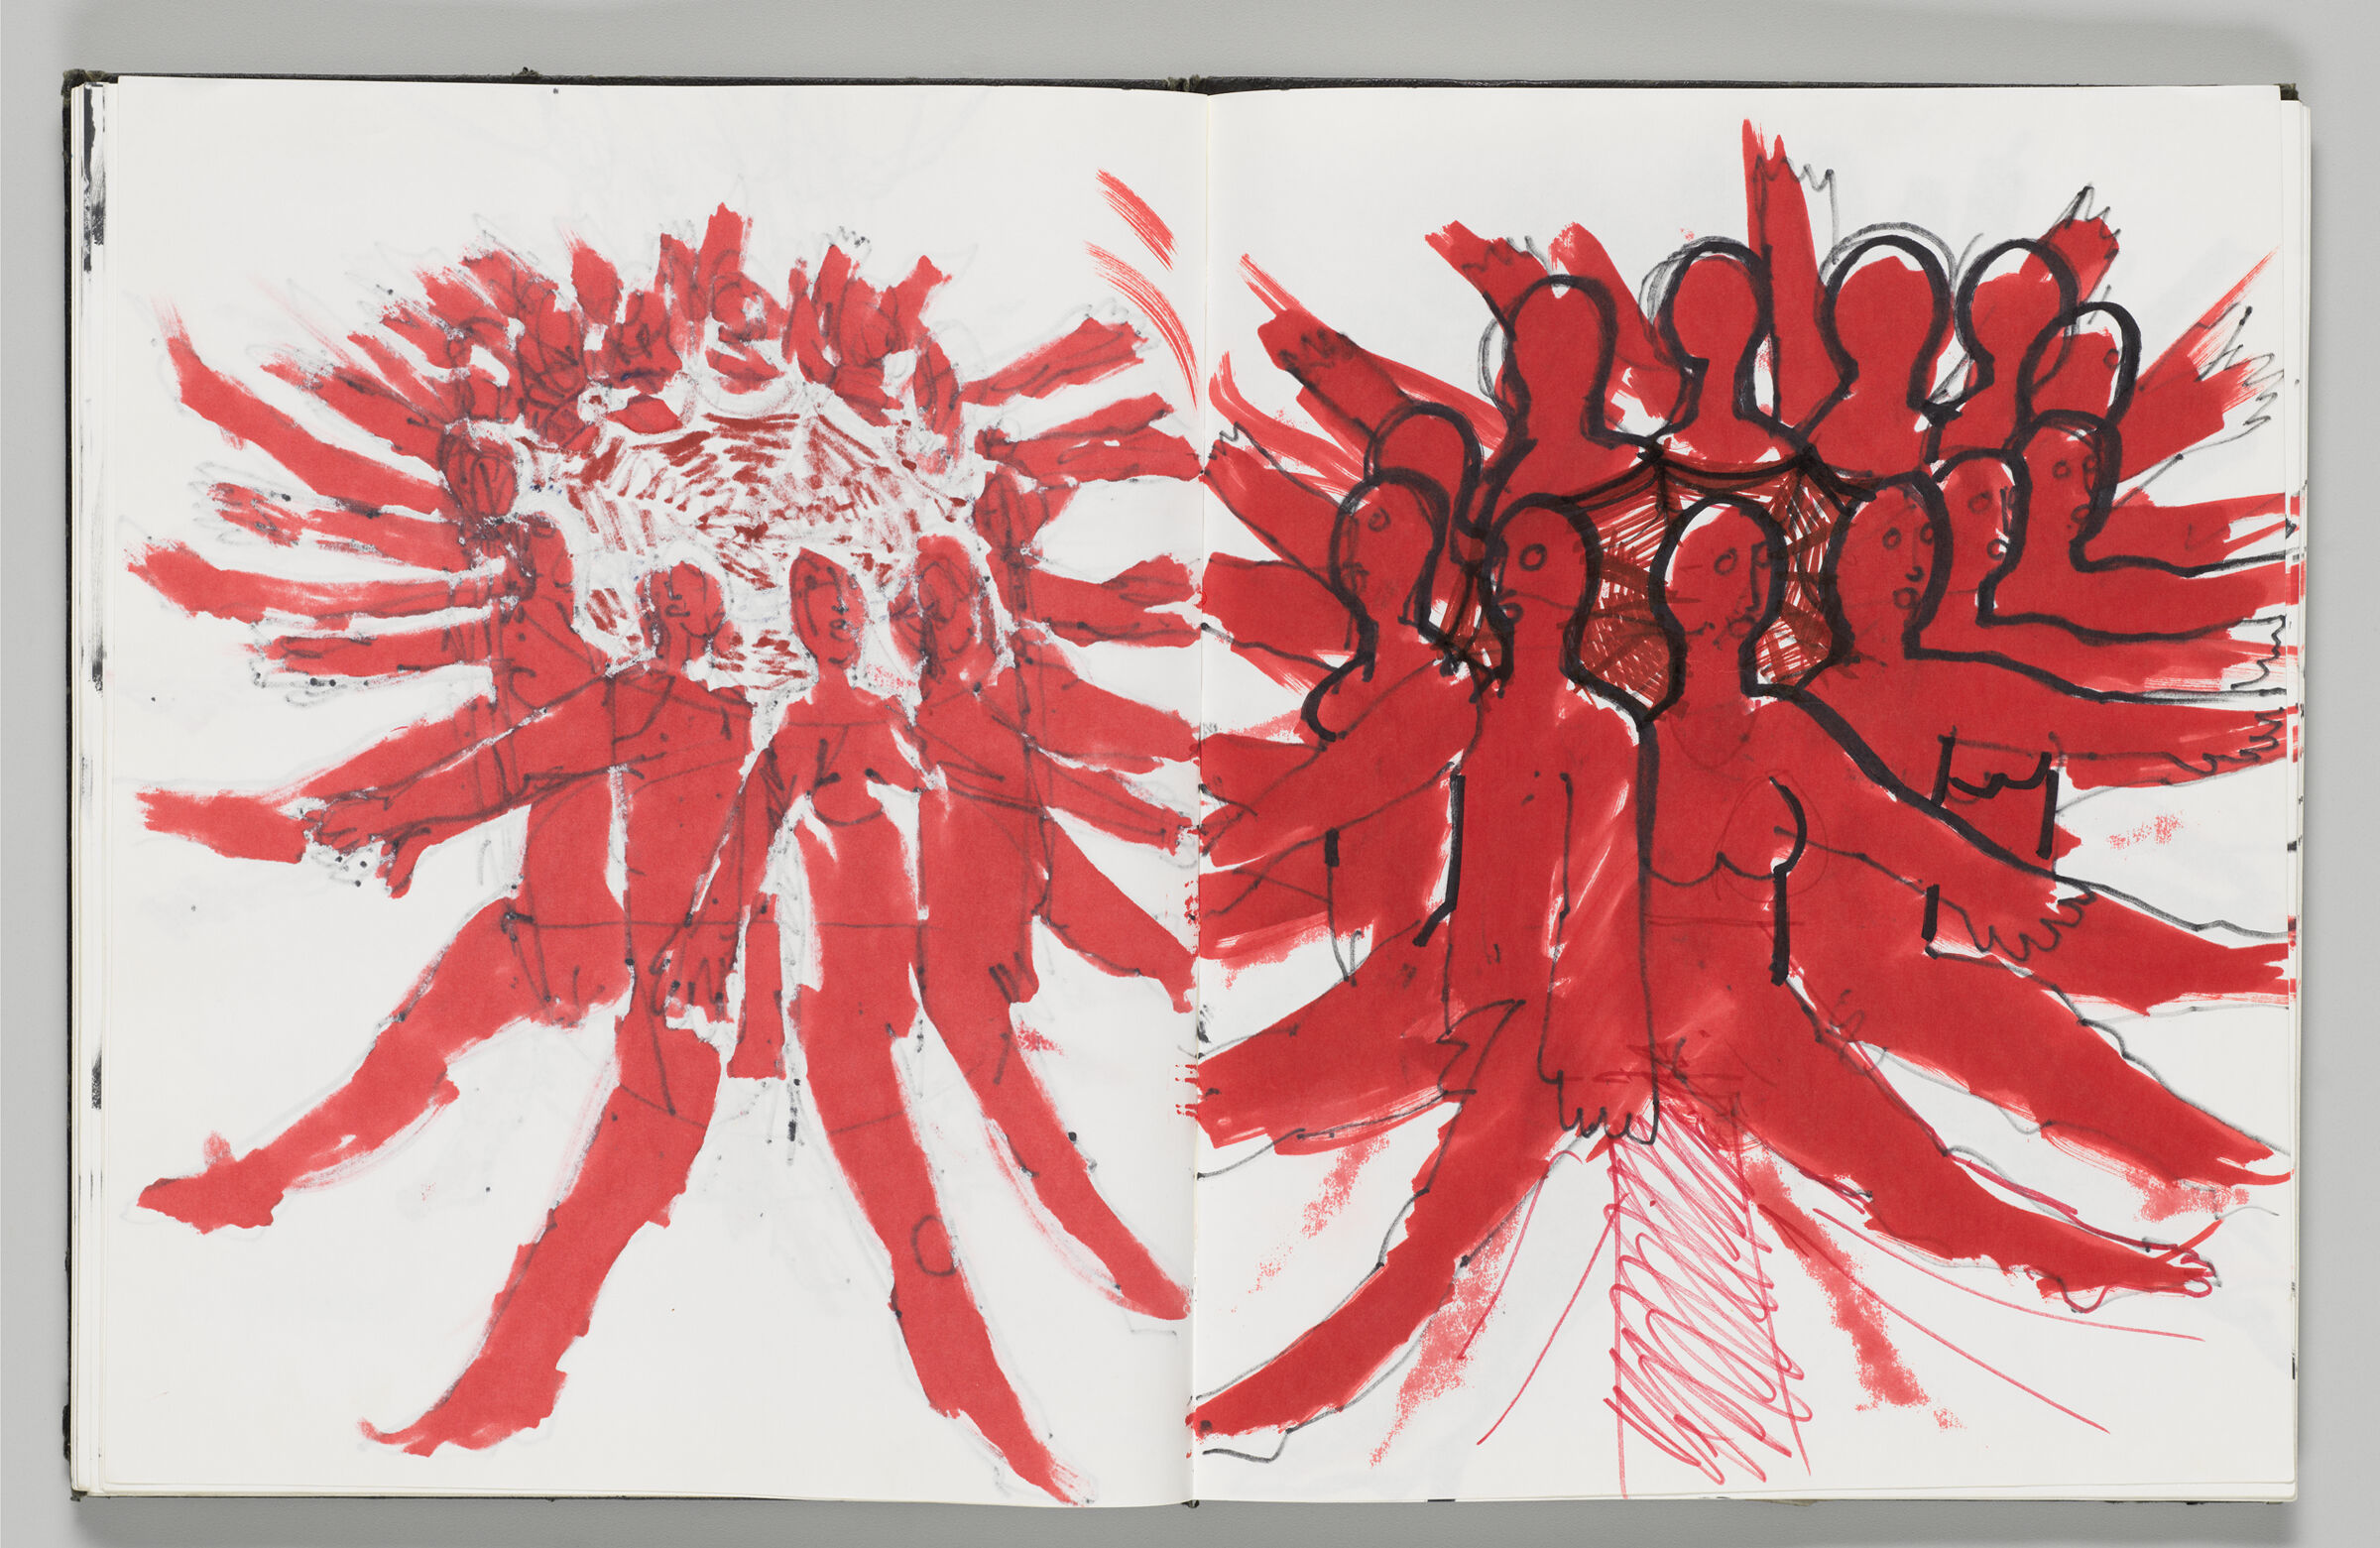 Untitled (Bleed-Through Of Previous Pages, Left Page); Untitled (Carousel Of Male And Female Figures, Right Page)